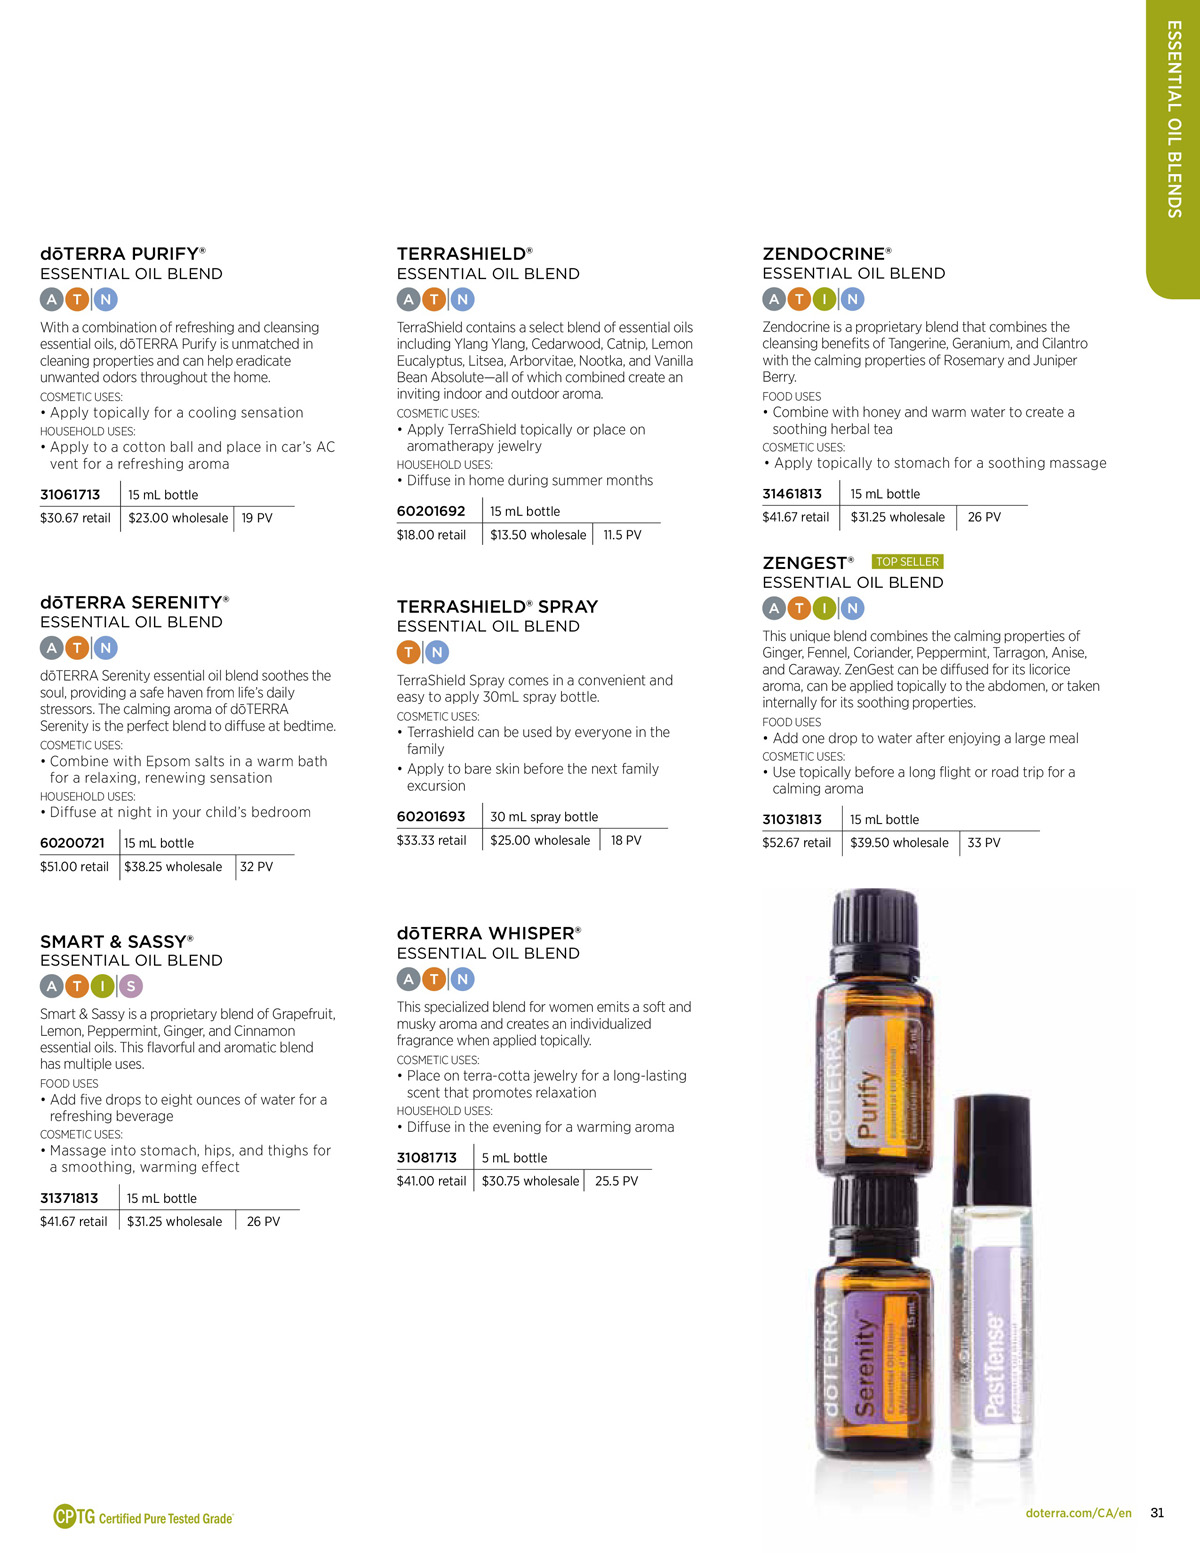 doterra product guide page 31